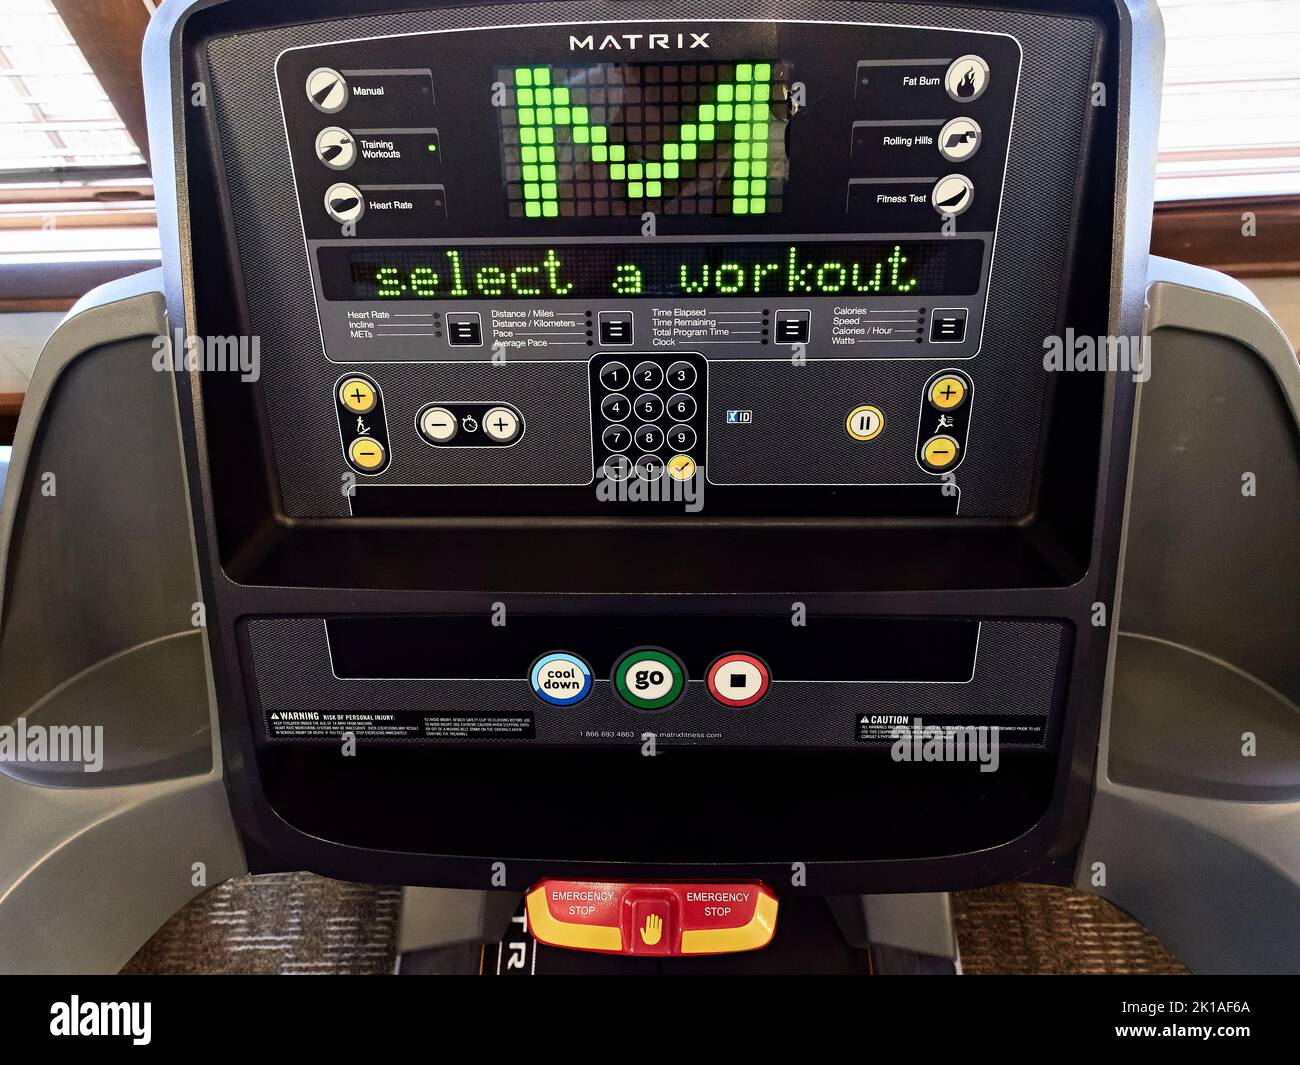 Control panel on a Matrix advanced treadmill for exercising and fitness training in a gym. Stock Photo